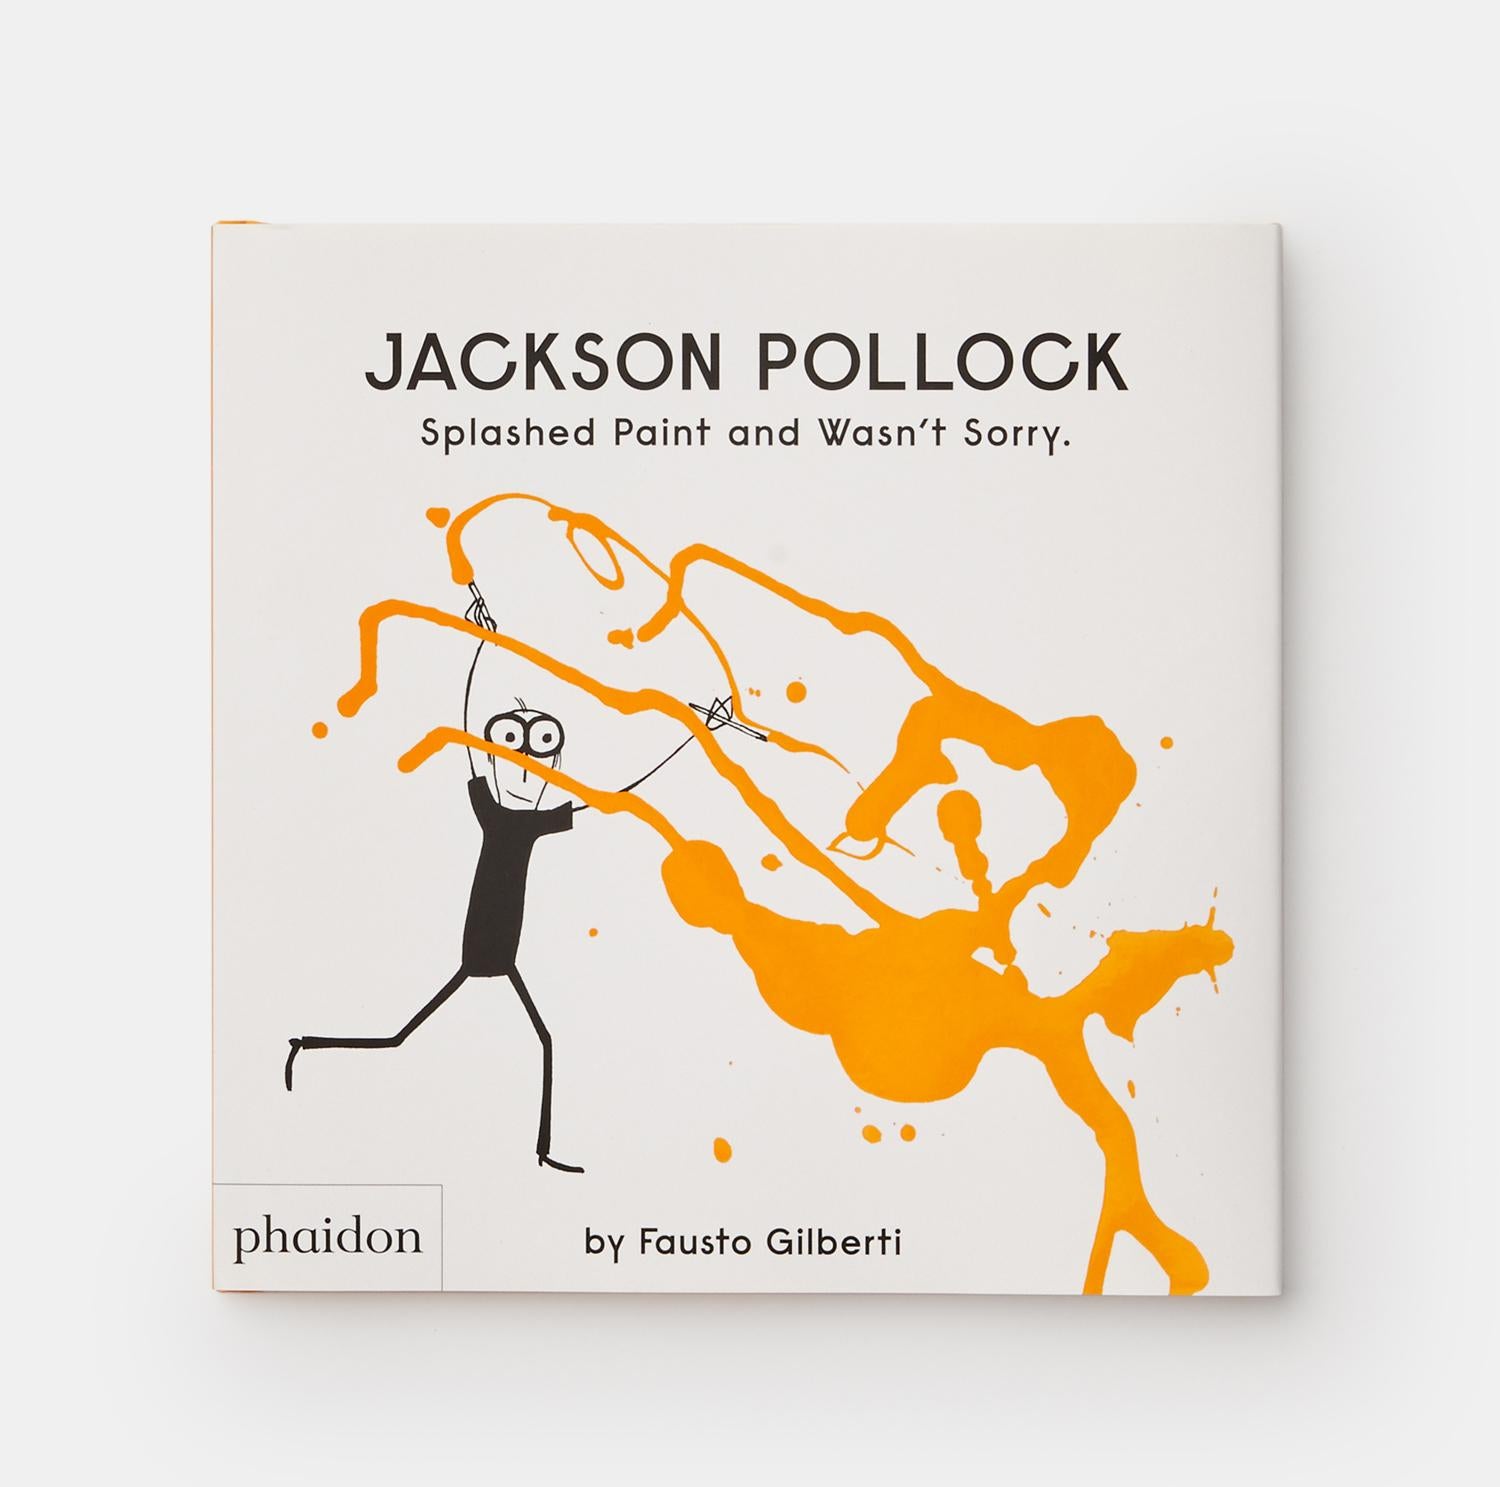 A clever, charmingly quirky portrayal of painter Jackson Pollock – and the first in a series of picture-book biographies of contemporary artists
Jackson Pollock was unlike any other painter. Instead of sitting in front of an easel with brushes, he